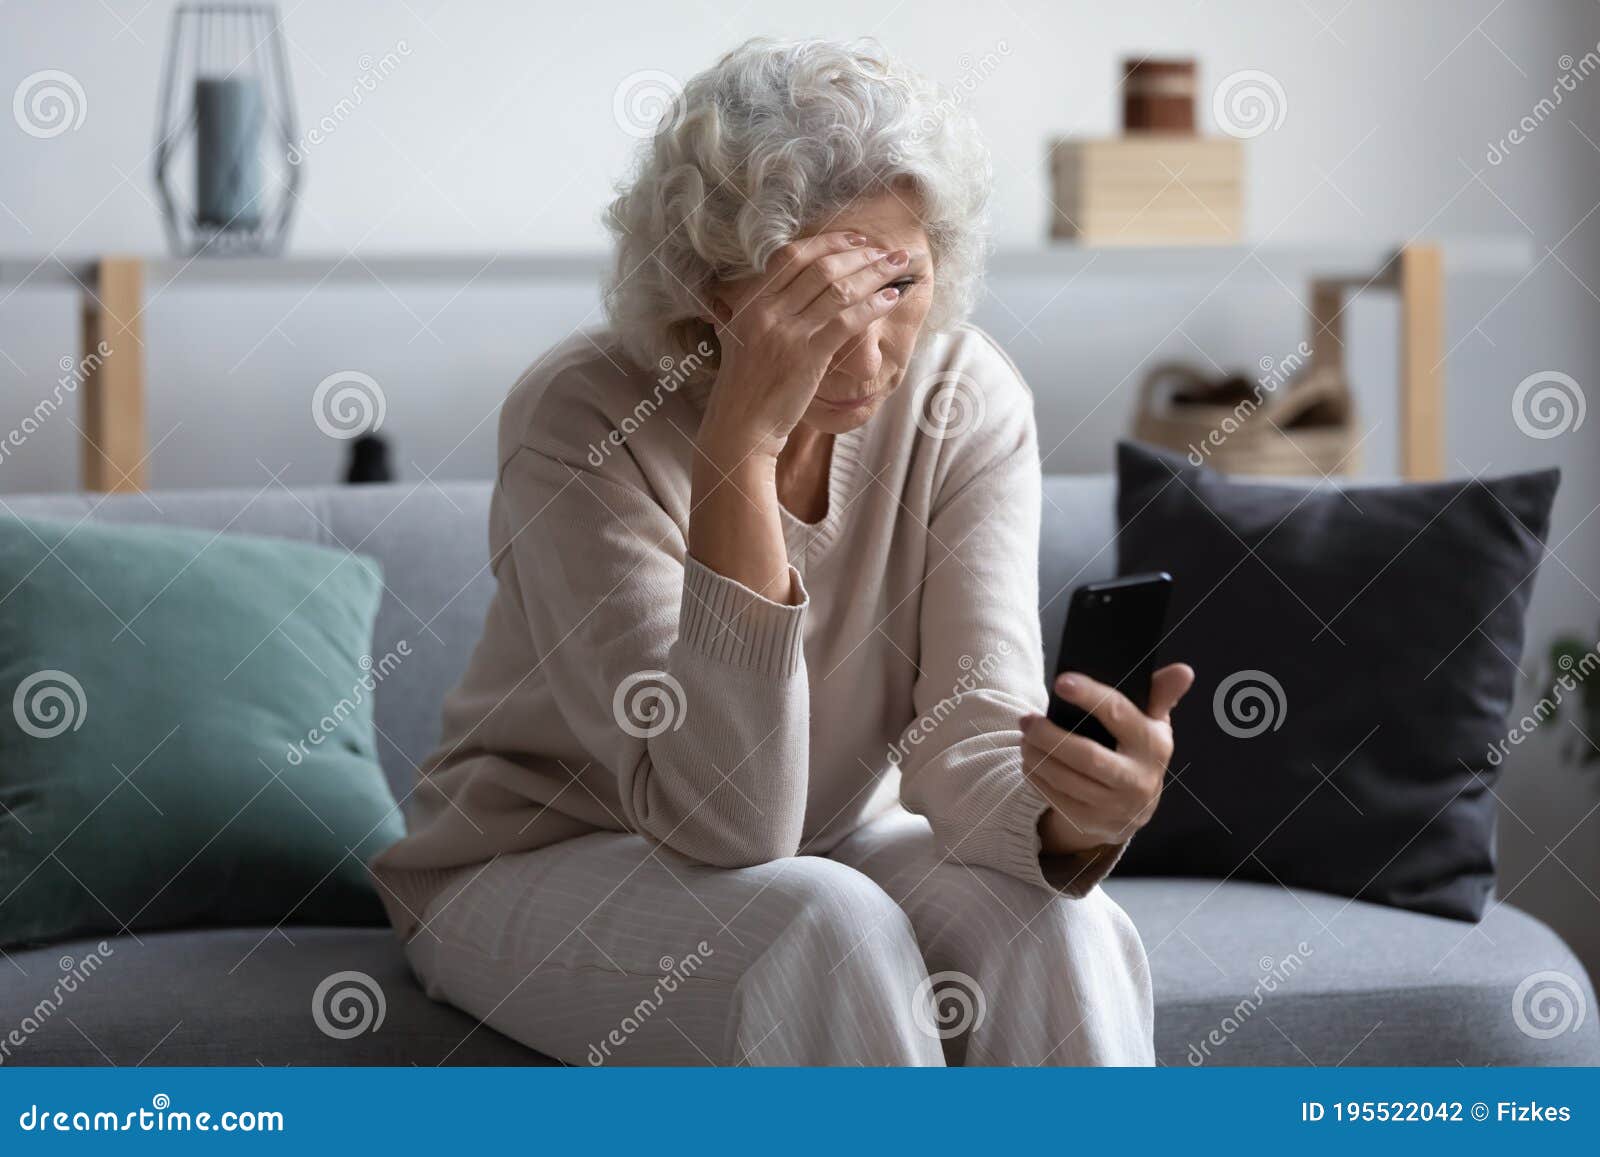 unhappy stressed mature middle aged woman looking at phone screen